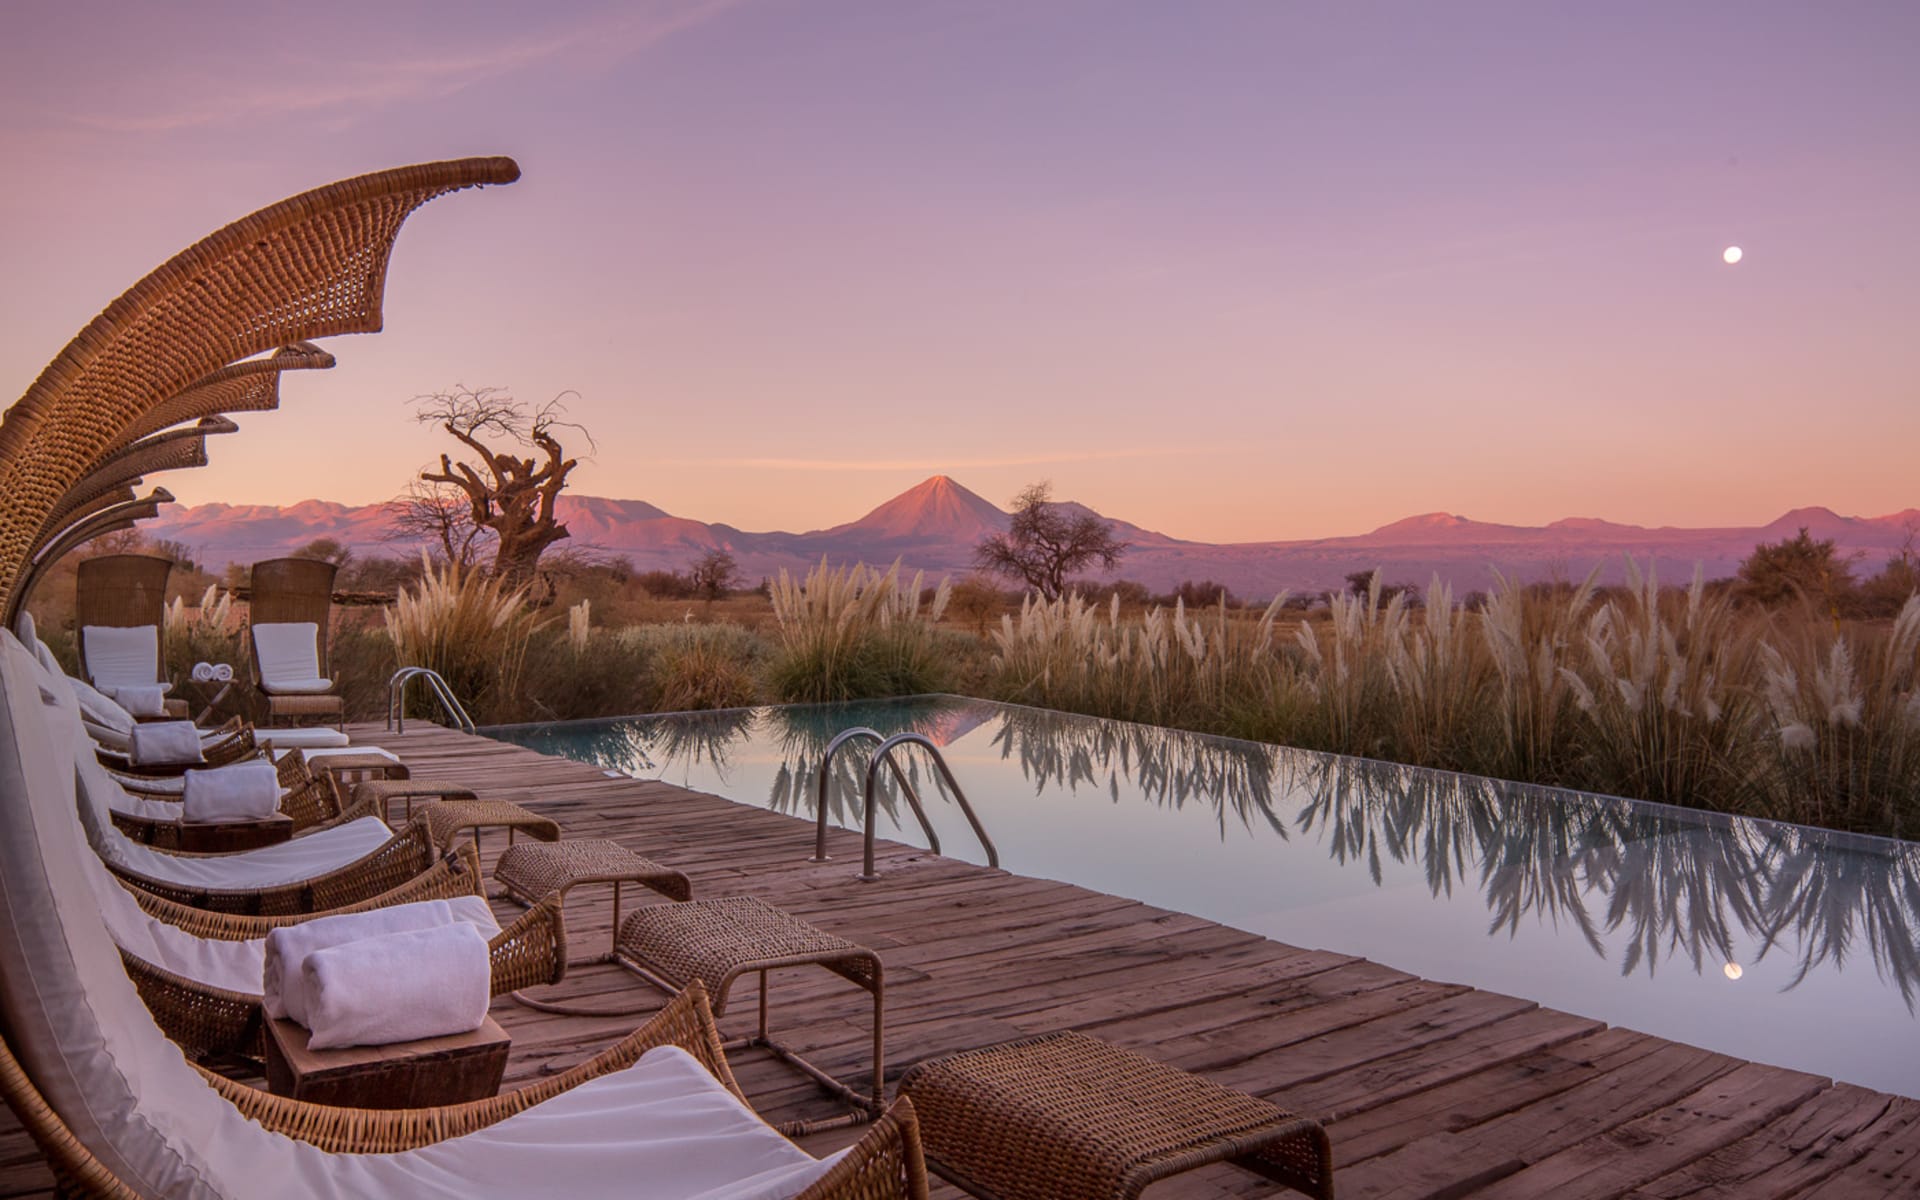 Crescent-shaped sun loungers overlook the pool and mountains in the distance that are purple from the sunset. 